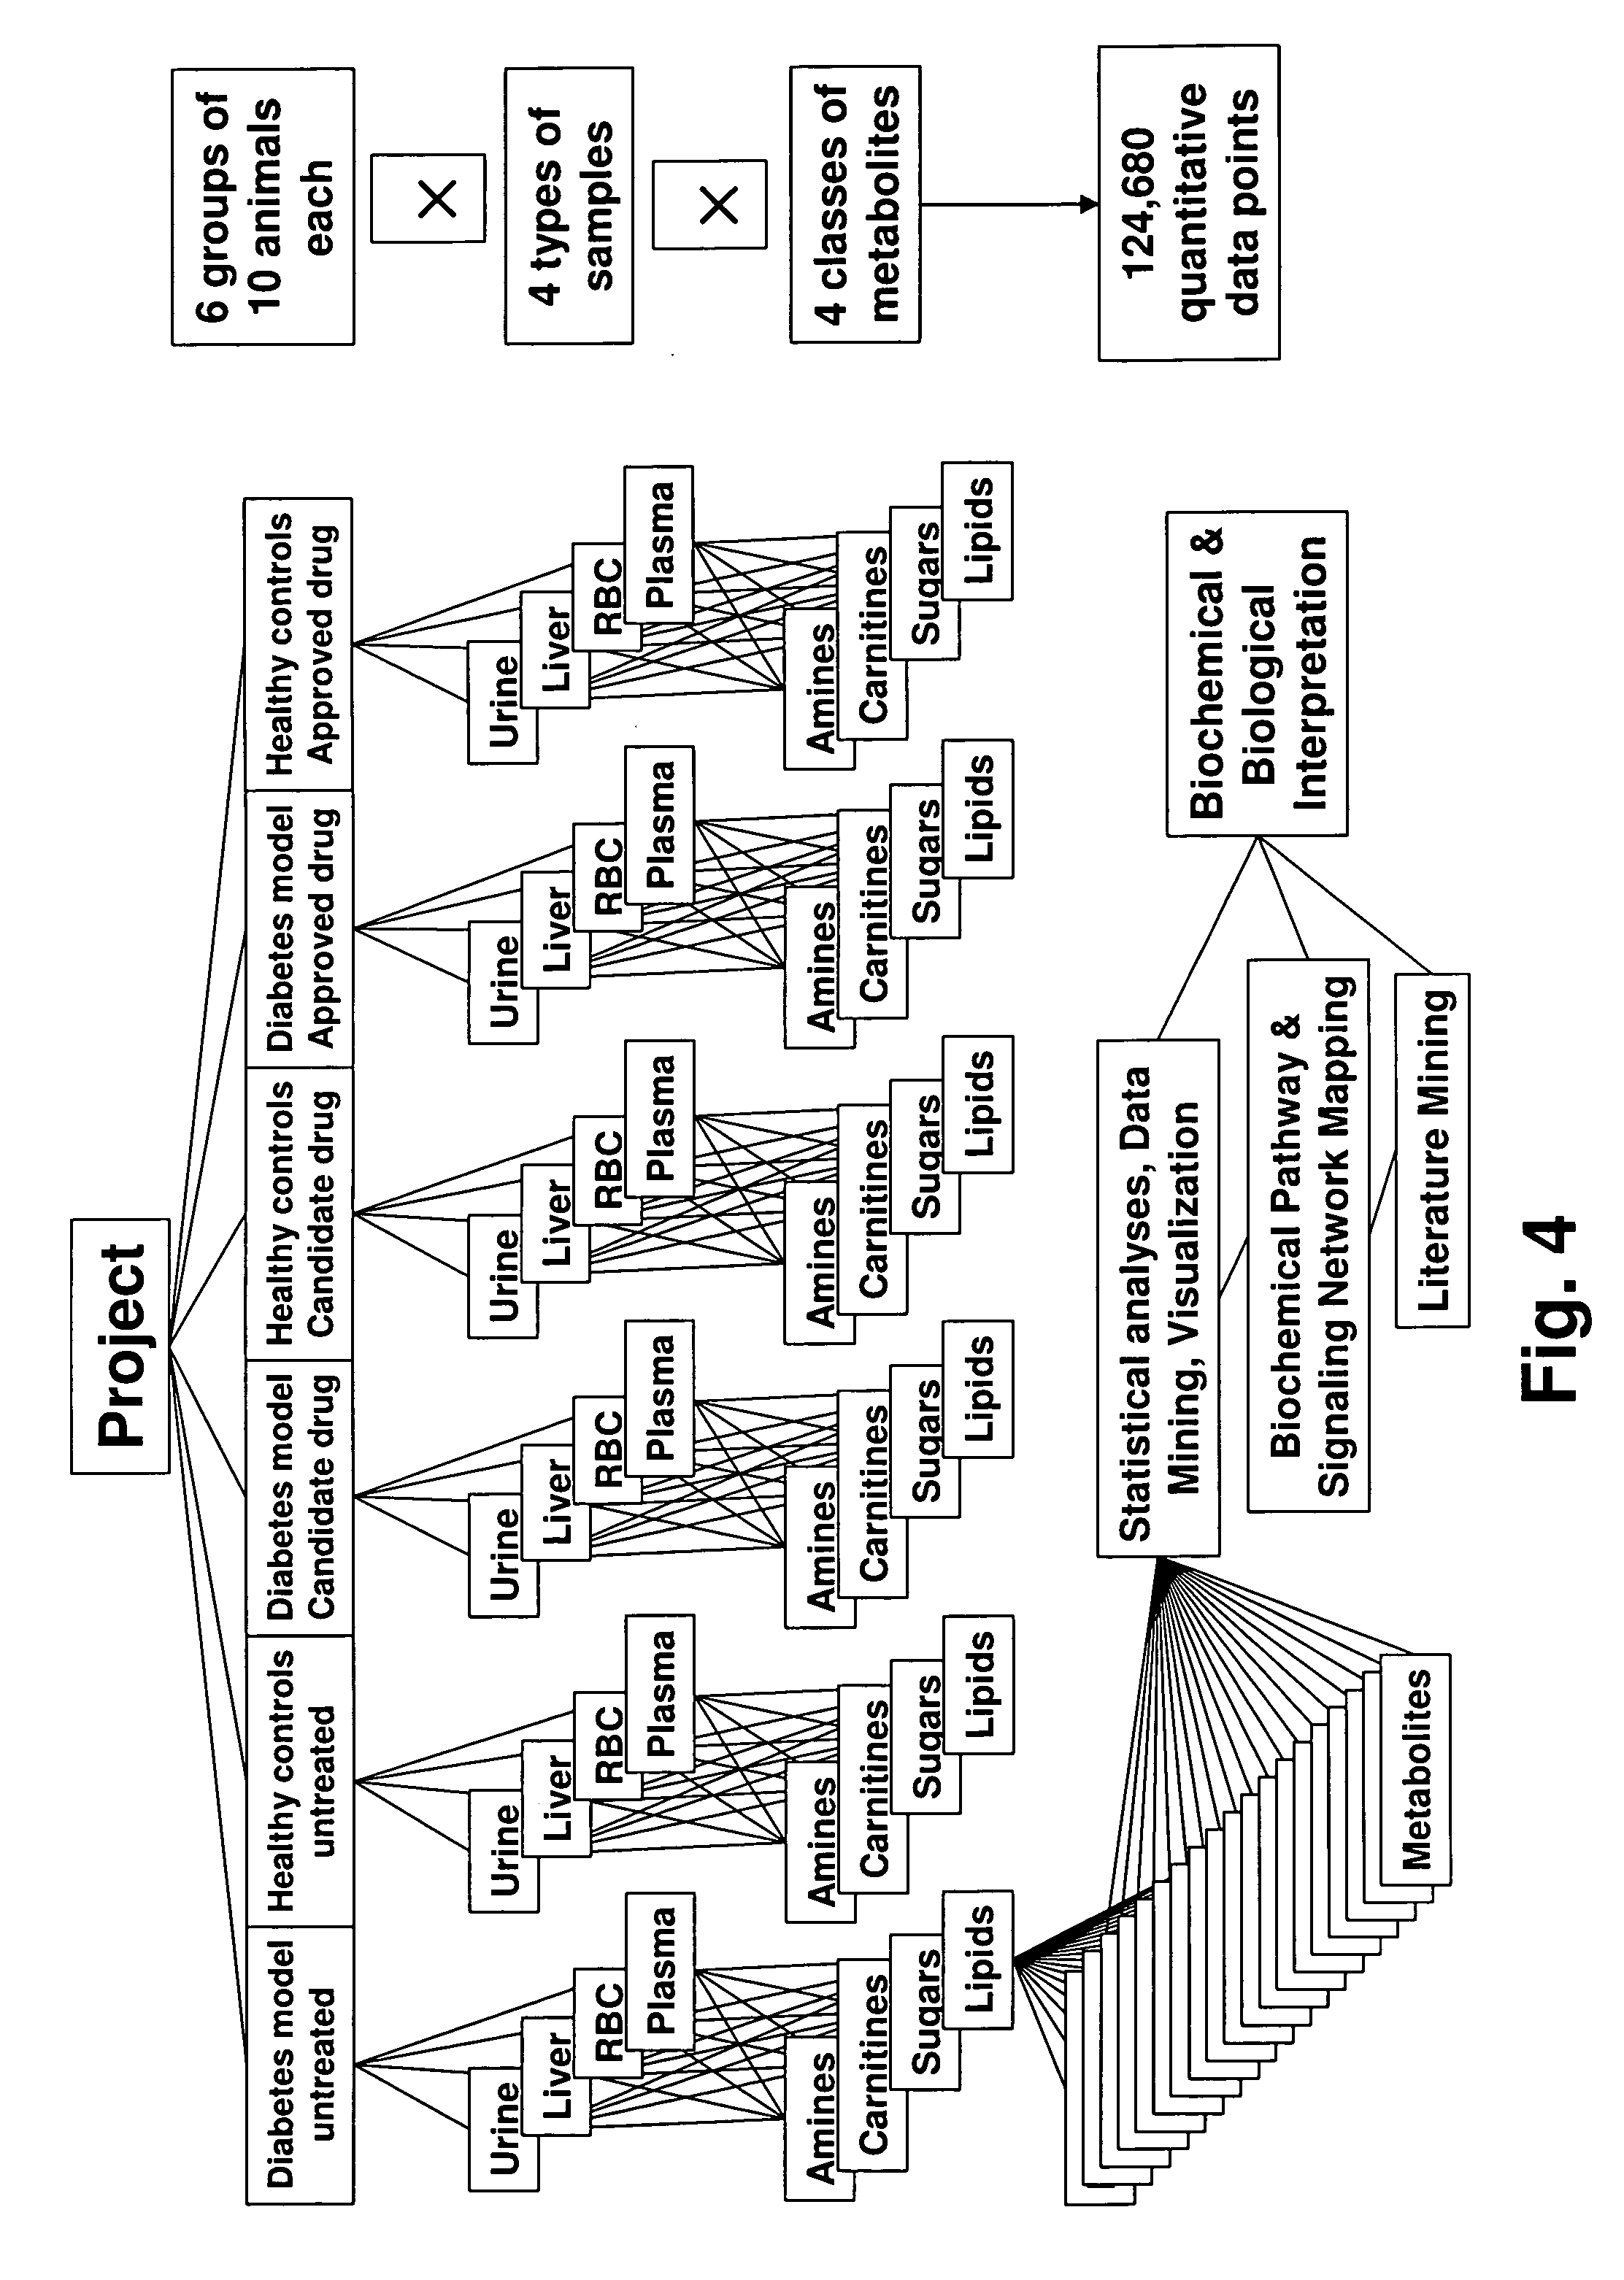 Apparatus and method for analyzing a metabolite profile